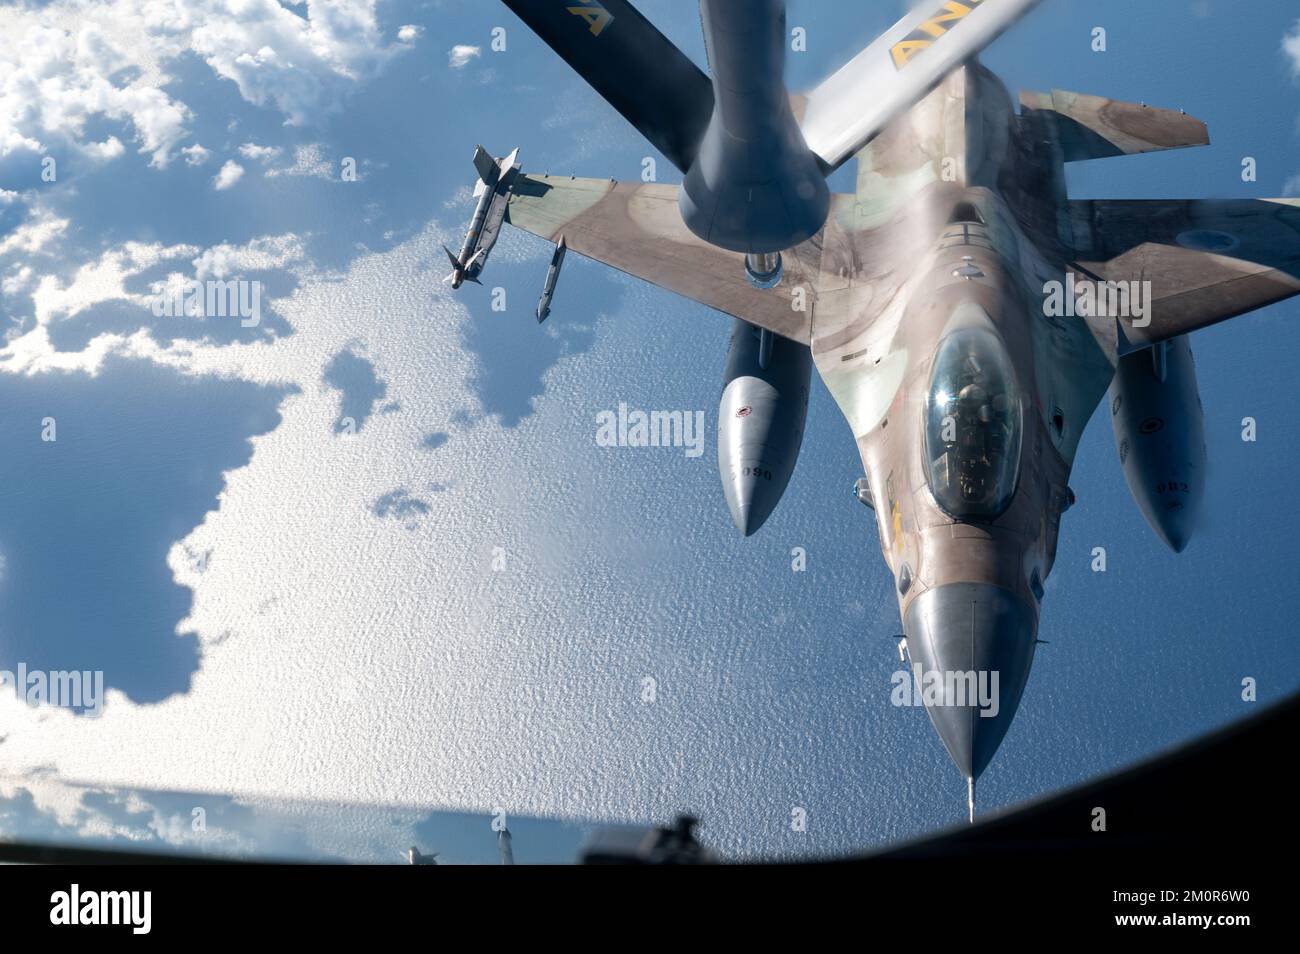 An Israeli Air Force F-16 Fighting Falcon prepares to receive refuel from a U.S. Air Force KC-135 Stratotanker assigned to the 340th Expeditionary Air Refueling Squadron, as part of a bilateral exercise over an undisclosed location in the U.S. Central Command area of responsibility, Nov. 30, 2022. The exercise demonstrated fighter aircraft integration and escort as well as refueling operations as part of the first of several exercises to maintain the ironclad commitment and bilateral aerial capability between the U.S. and Israeli Air Forces. (U.S. Air Force photo by Staff Sgt. Kirby Turbak) Stock Photo